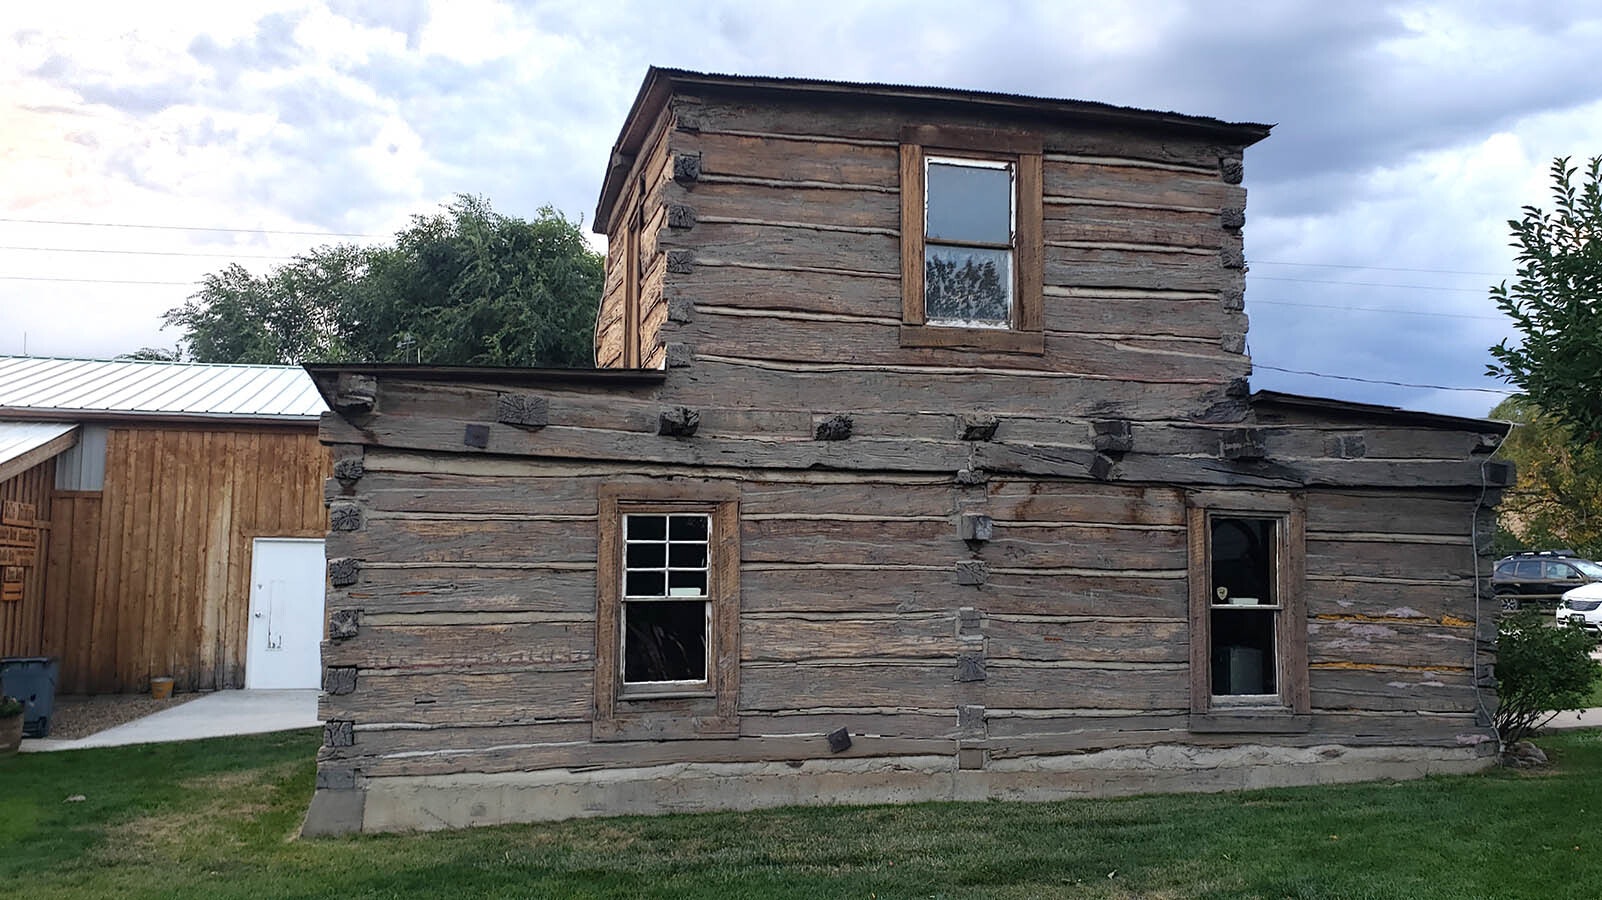 Mountain Man Jim Baker's castle cabin on the plains has been rebuilt a mile or so from its original location at the Little Snake River Museum in Savery. It had a turret for its third story to serve as a watch tower.